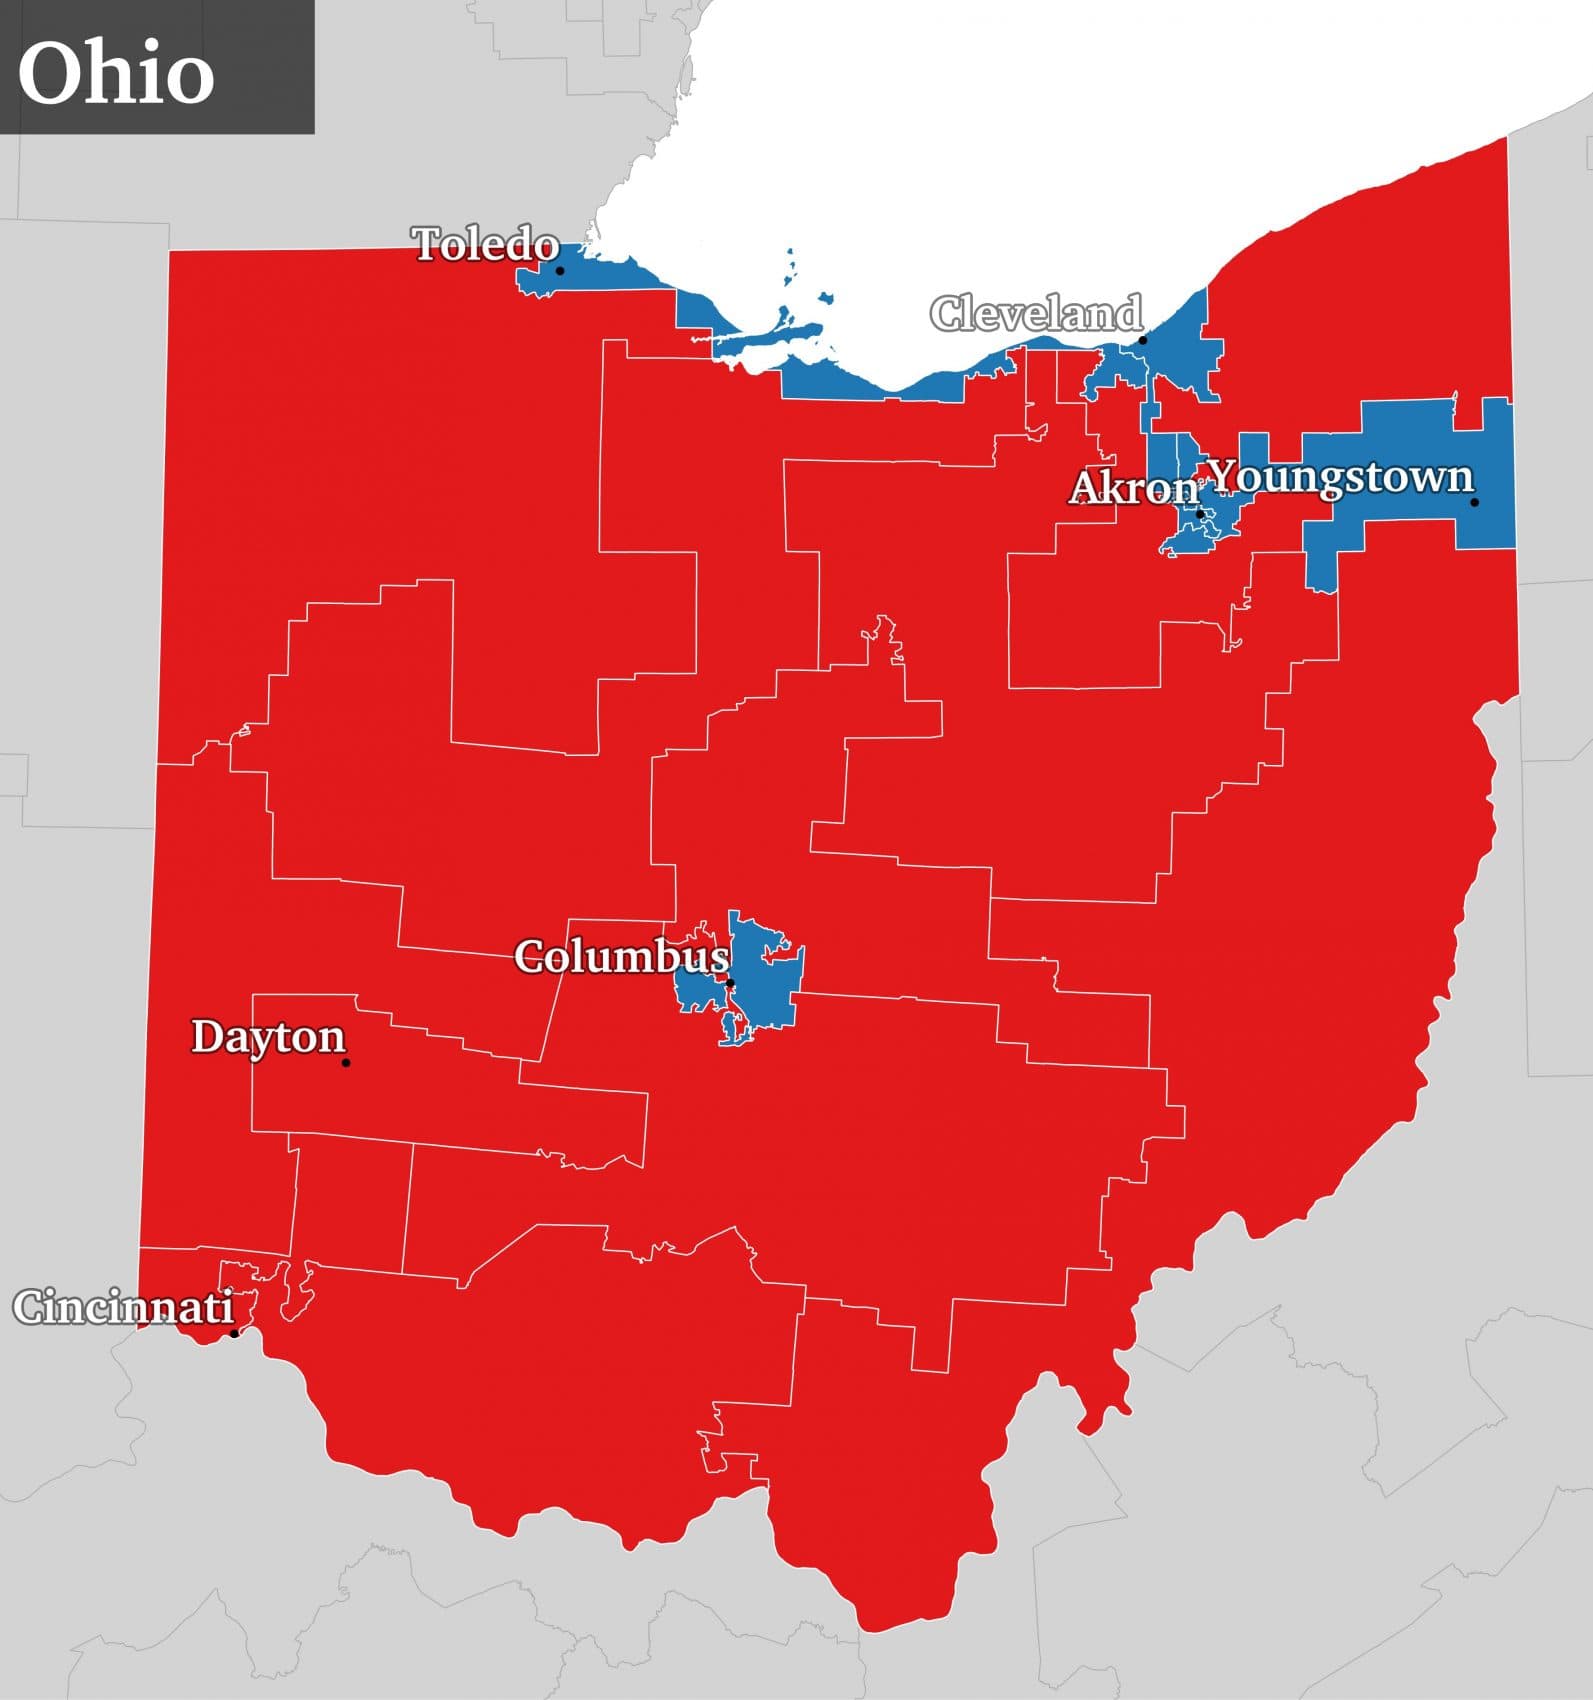 How do you find information on Ohio elections?